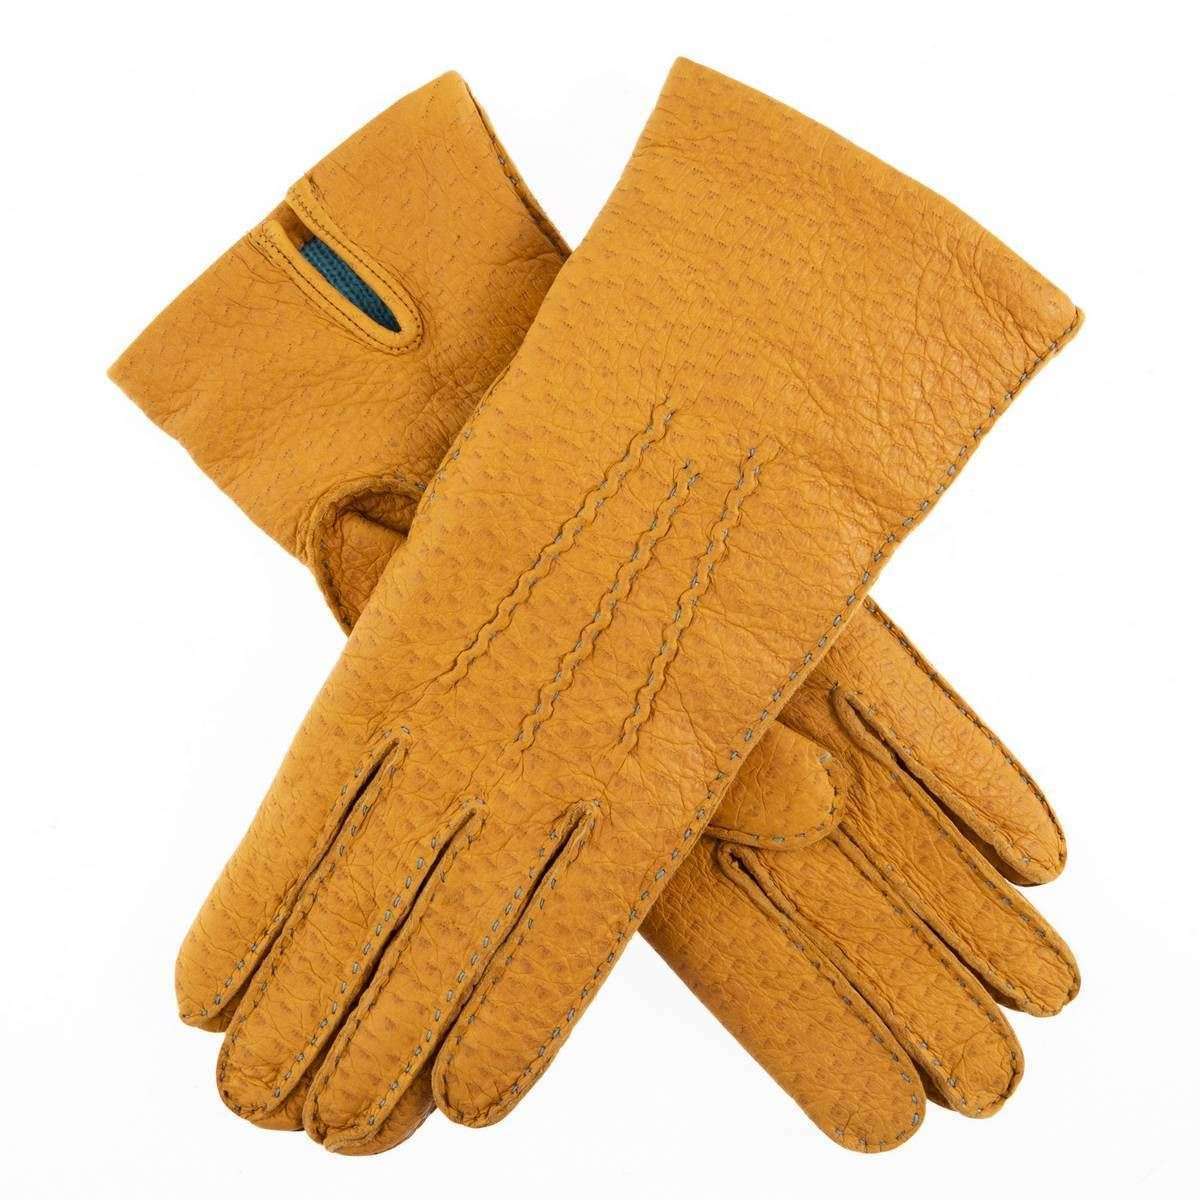 Dents Sudeley Cashmere Lined Gloves - Cork Yellow/Turquoise